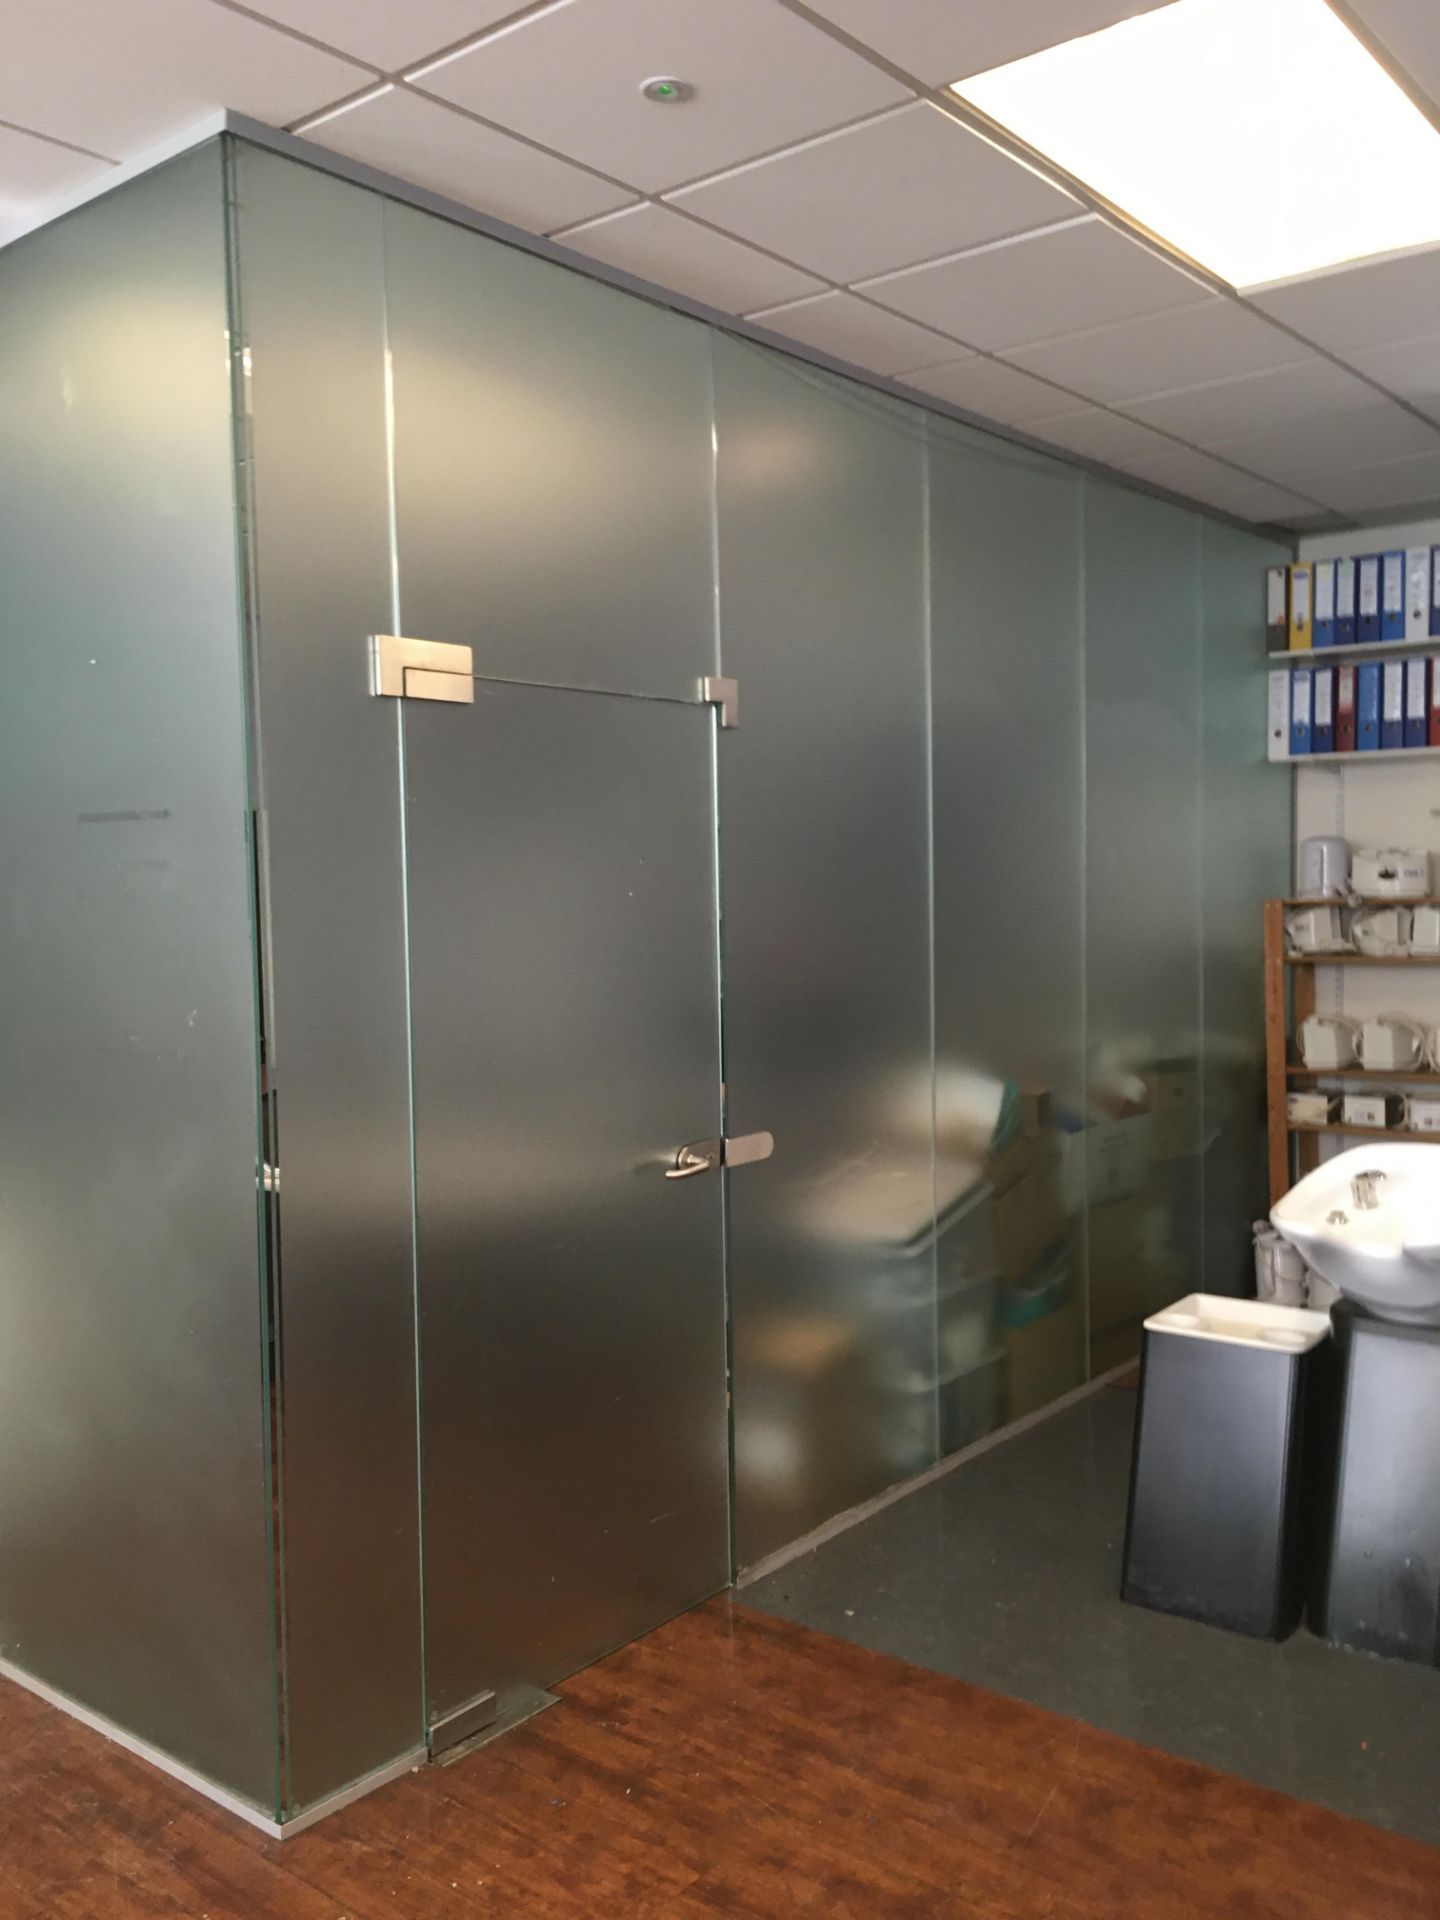 Toughend Glass 2 Sided Partition Wall with Single Door - Image 4 of 4